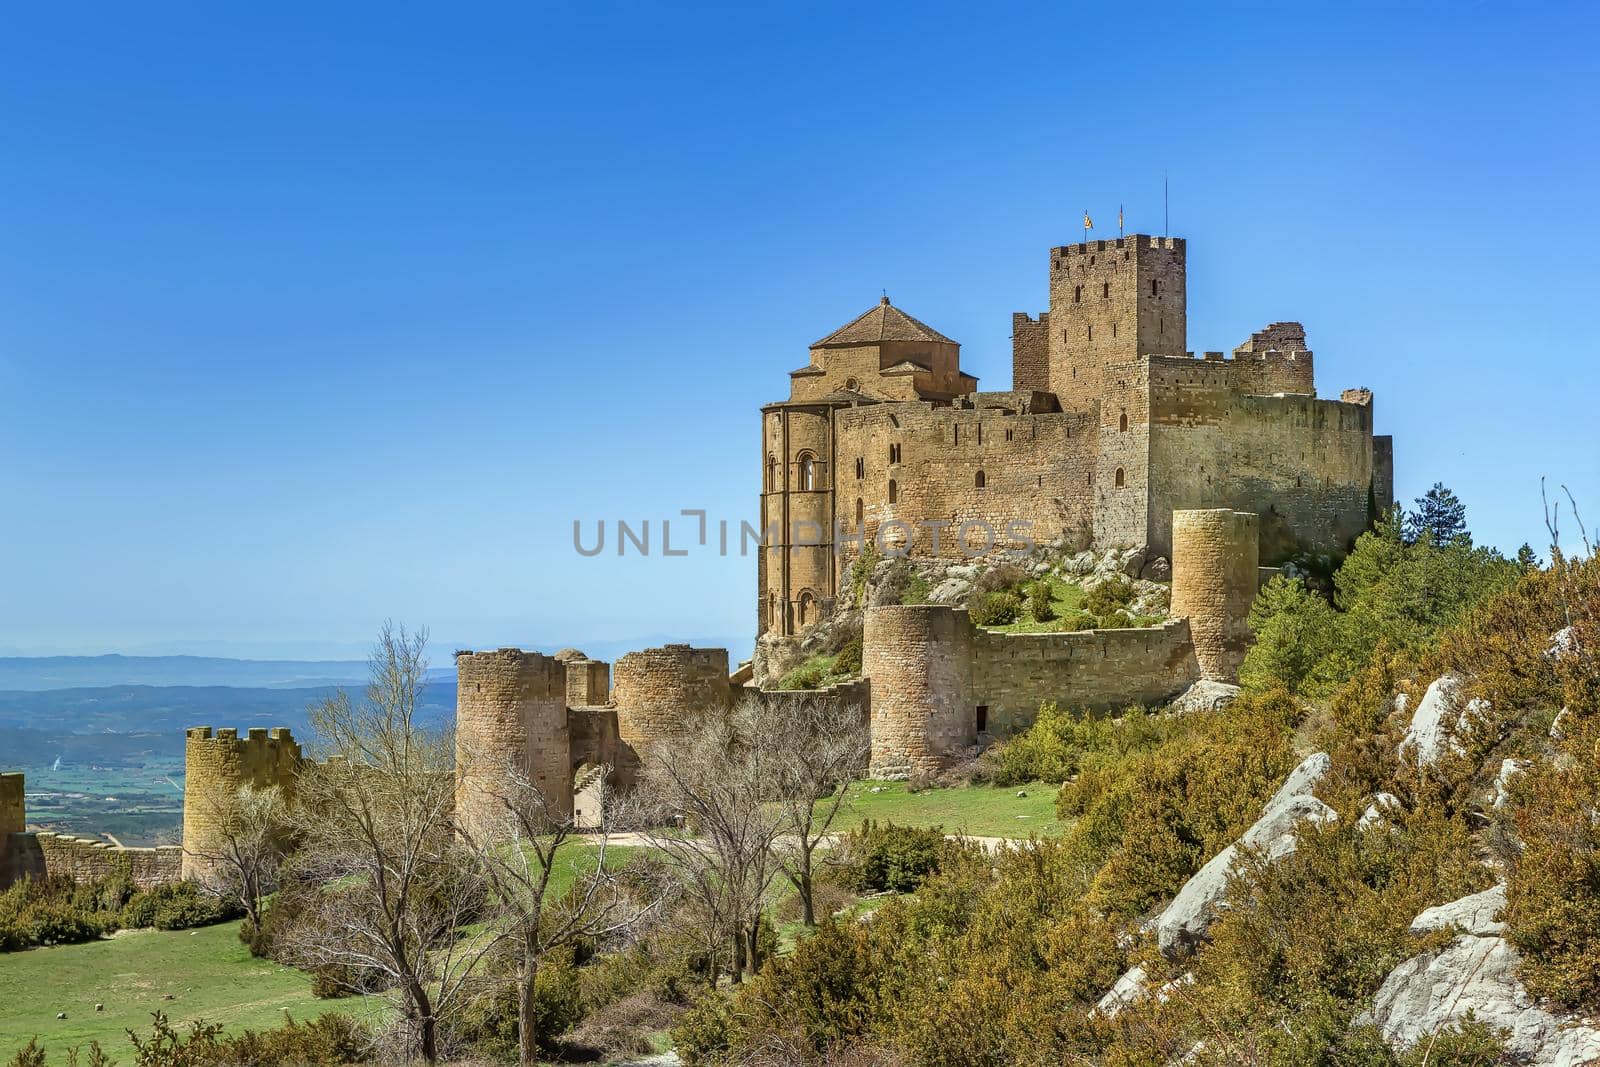 Castle of Loarre is a Romanesque Castle and Abbey located in the Aragon autonomous region of Spain. It is one of the oldest castles in Spain